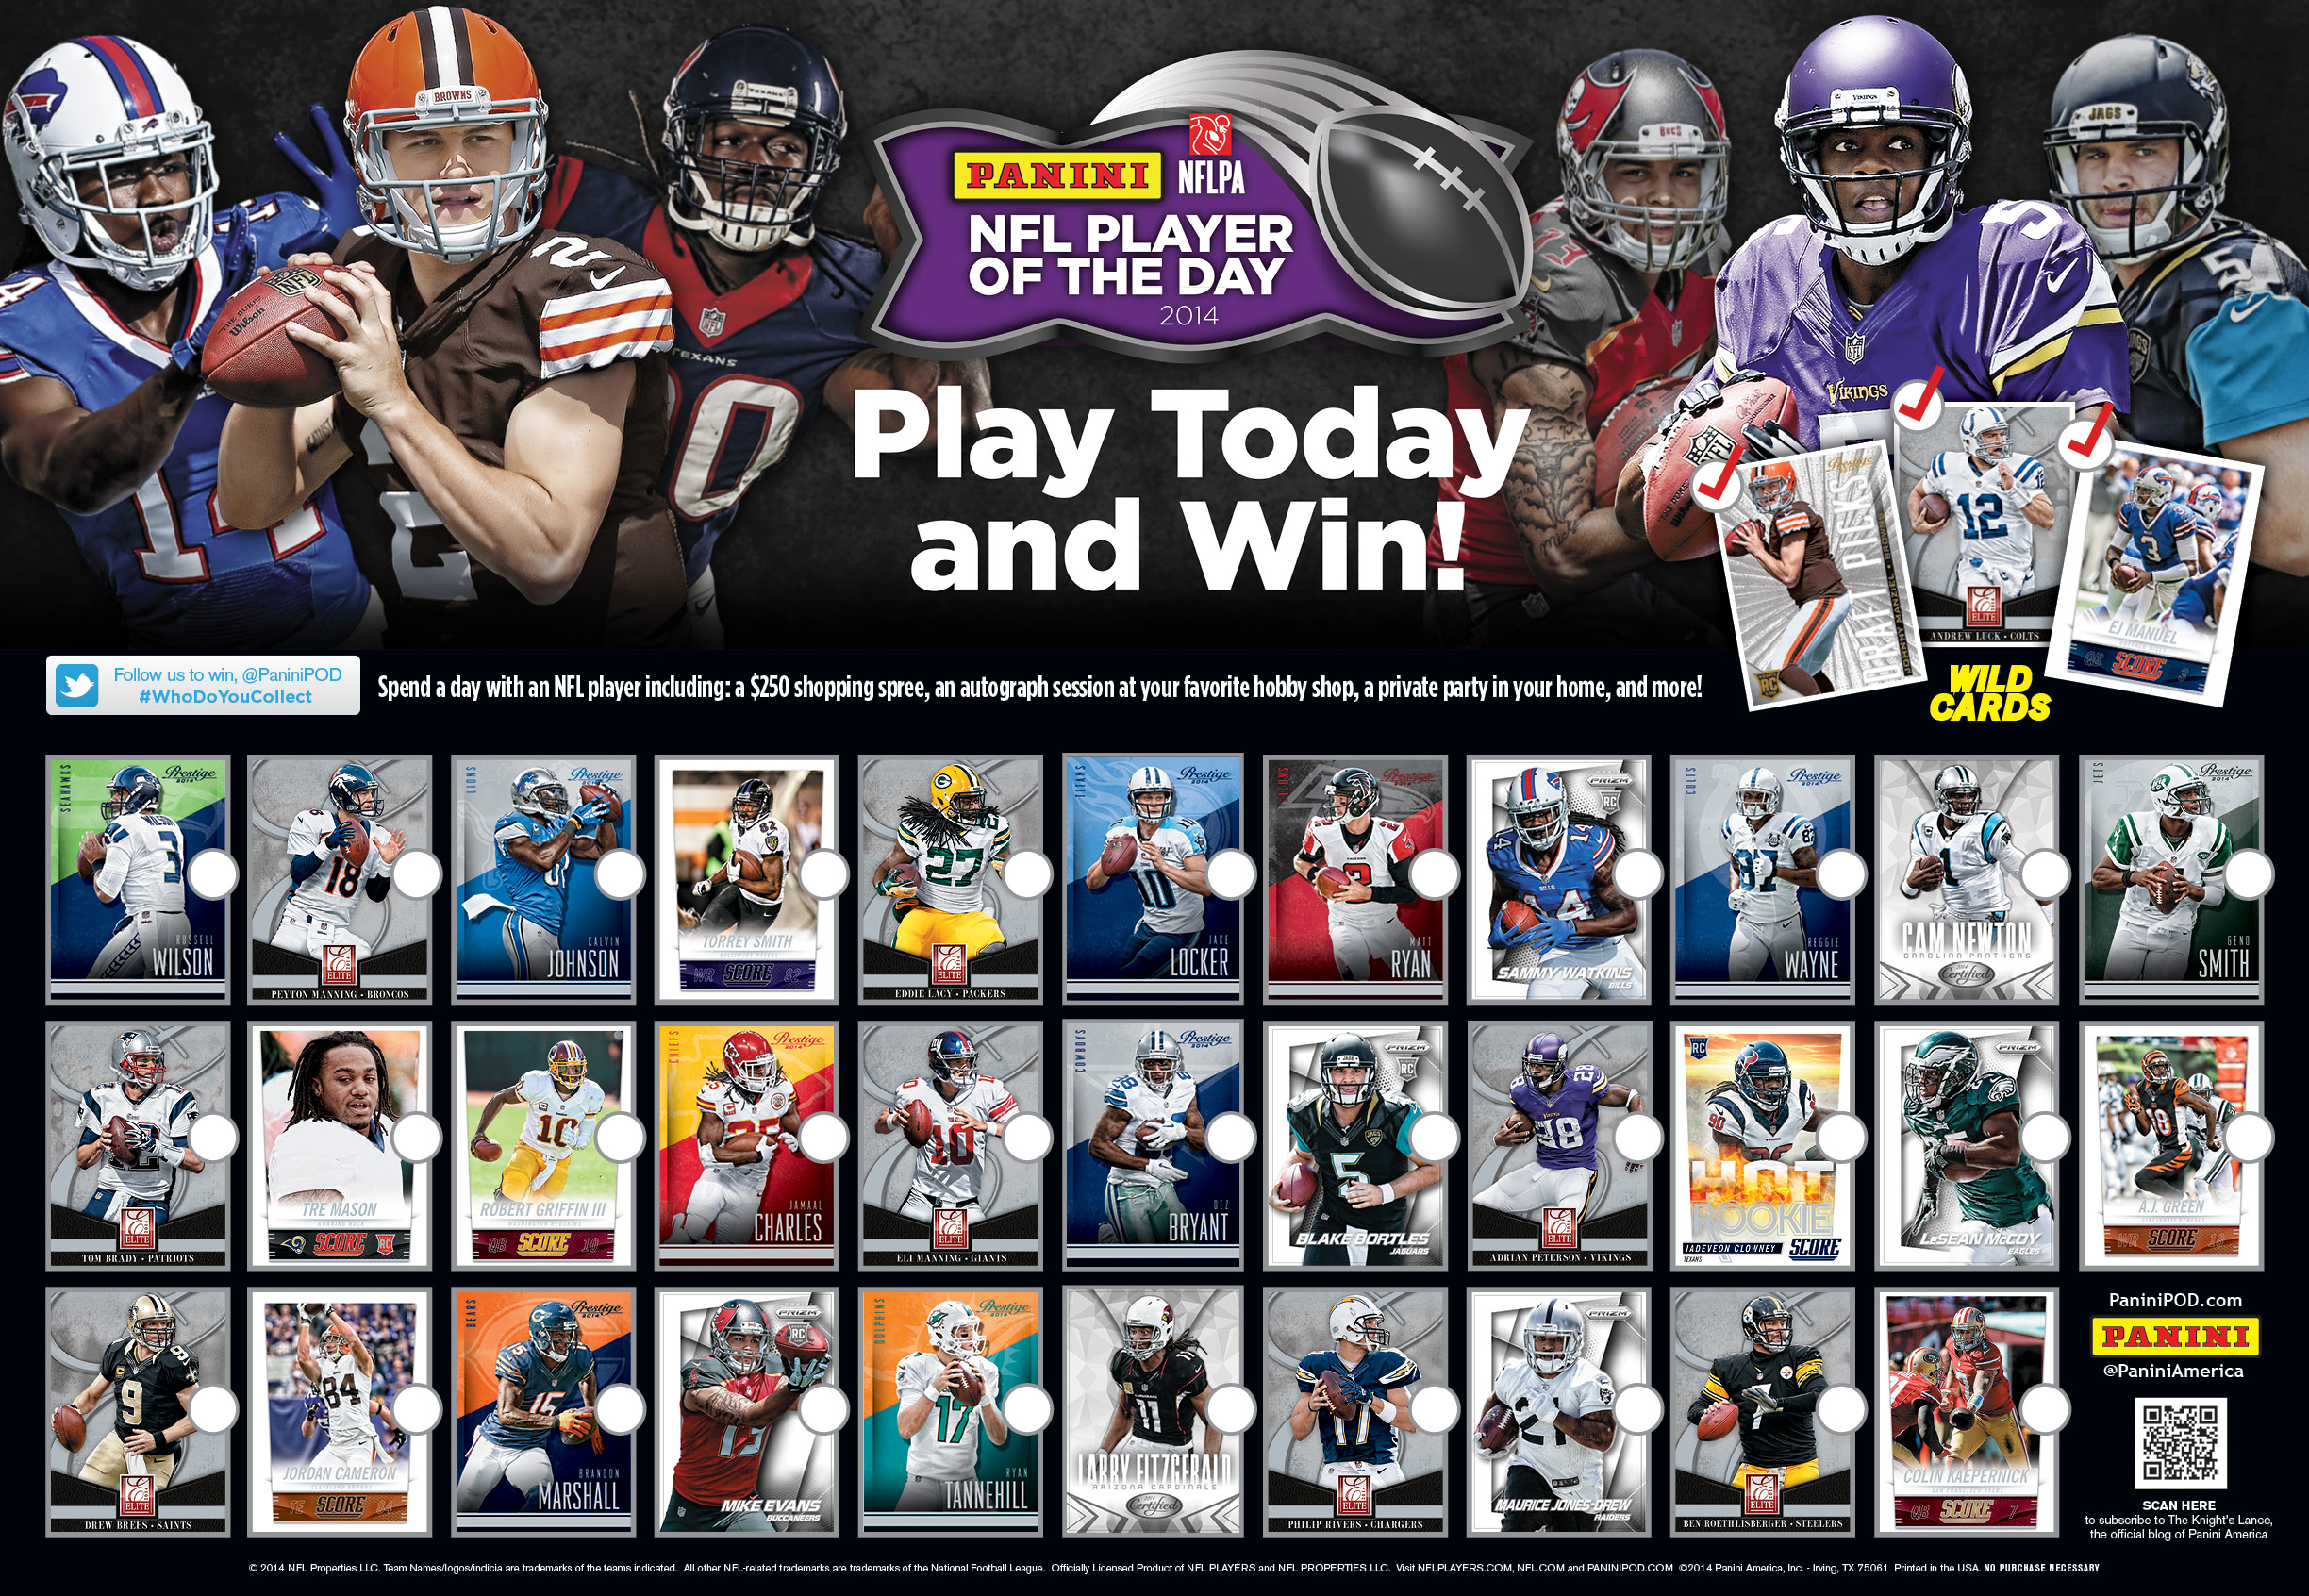 Panini NFL Player of the Day Promotion Kicks Off Beckett News